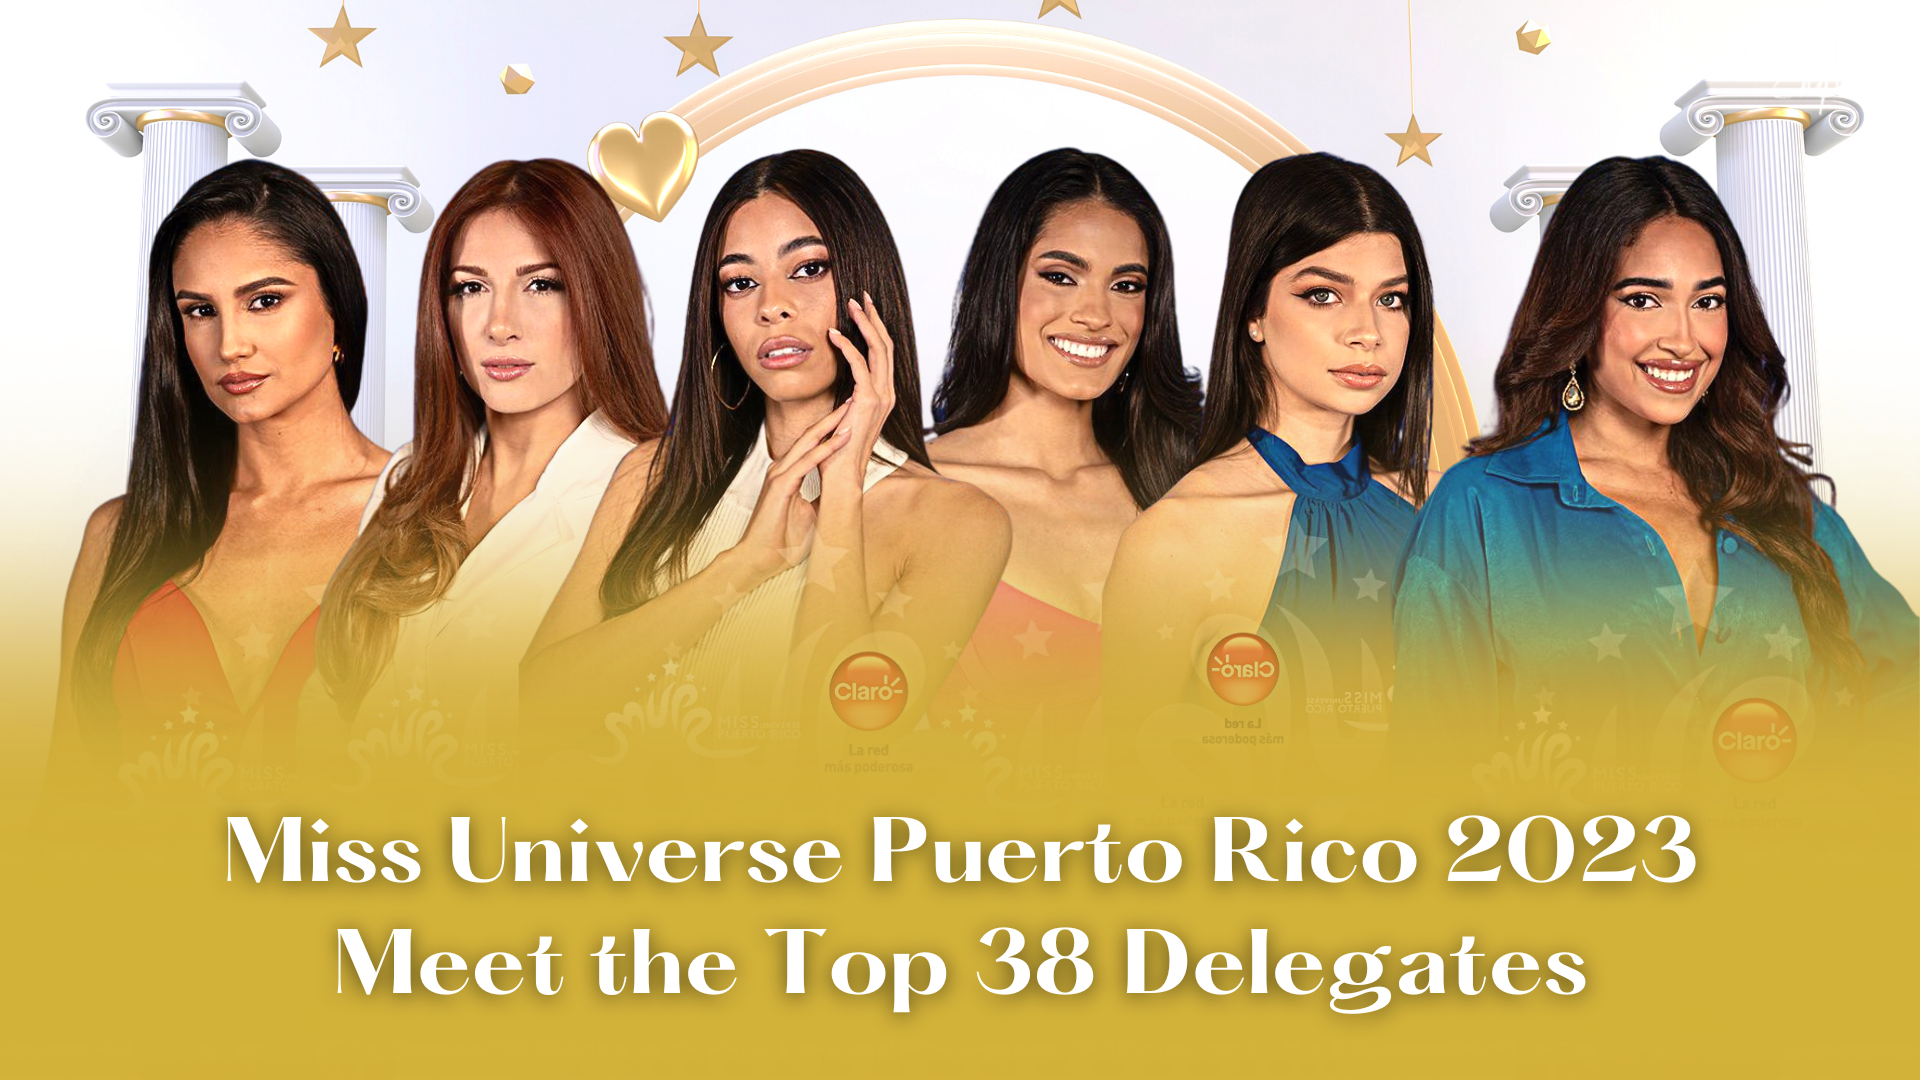 Meet the Candidates of Miss Universe Puerto Rico 2023